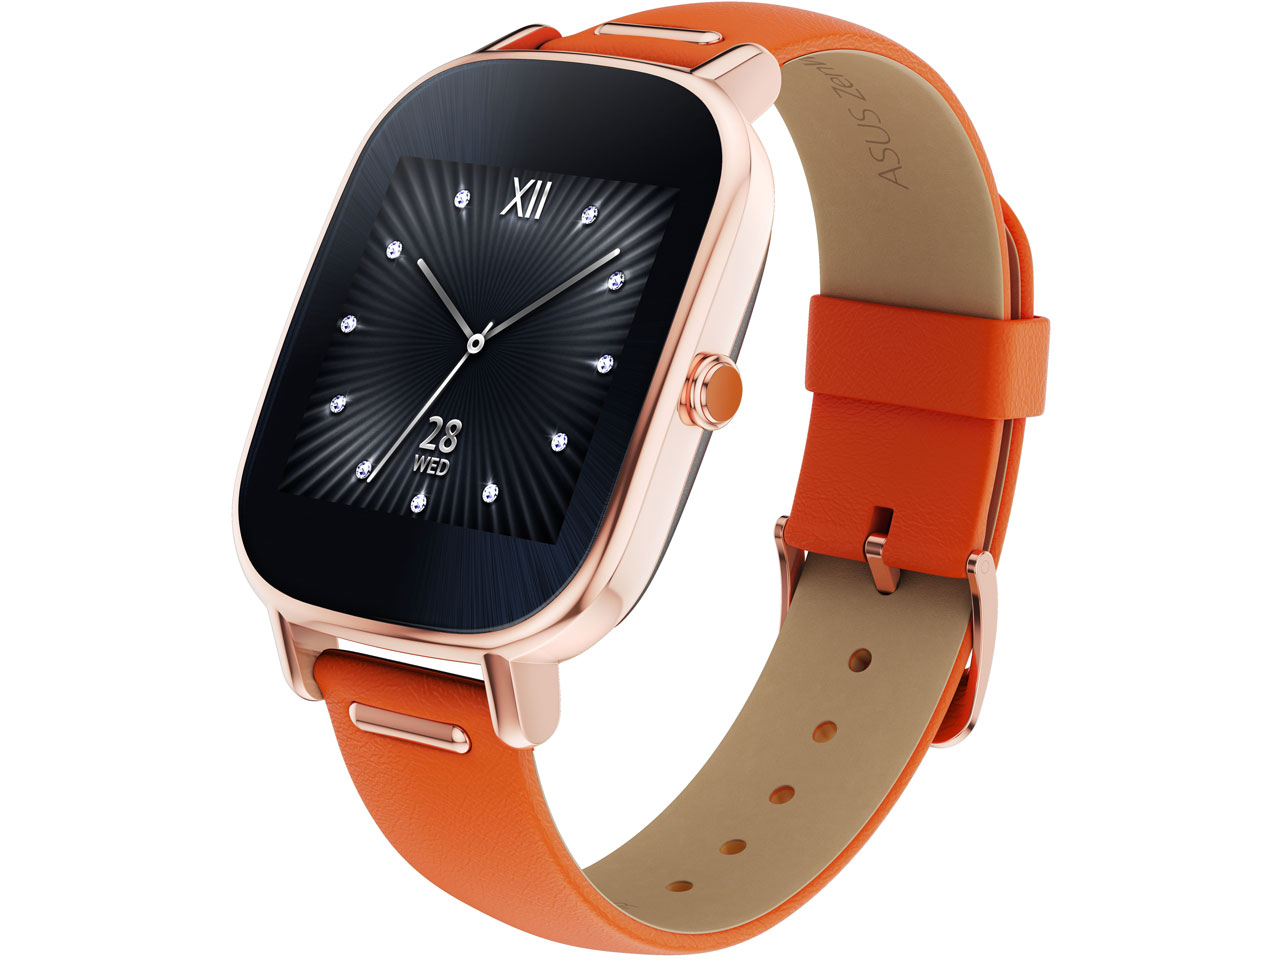 ASUS ZenWatch 2 WI502Q-OR04 [ローズゴールド/オレンジ]